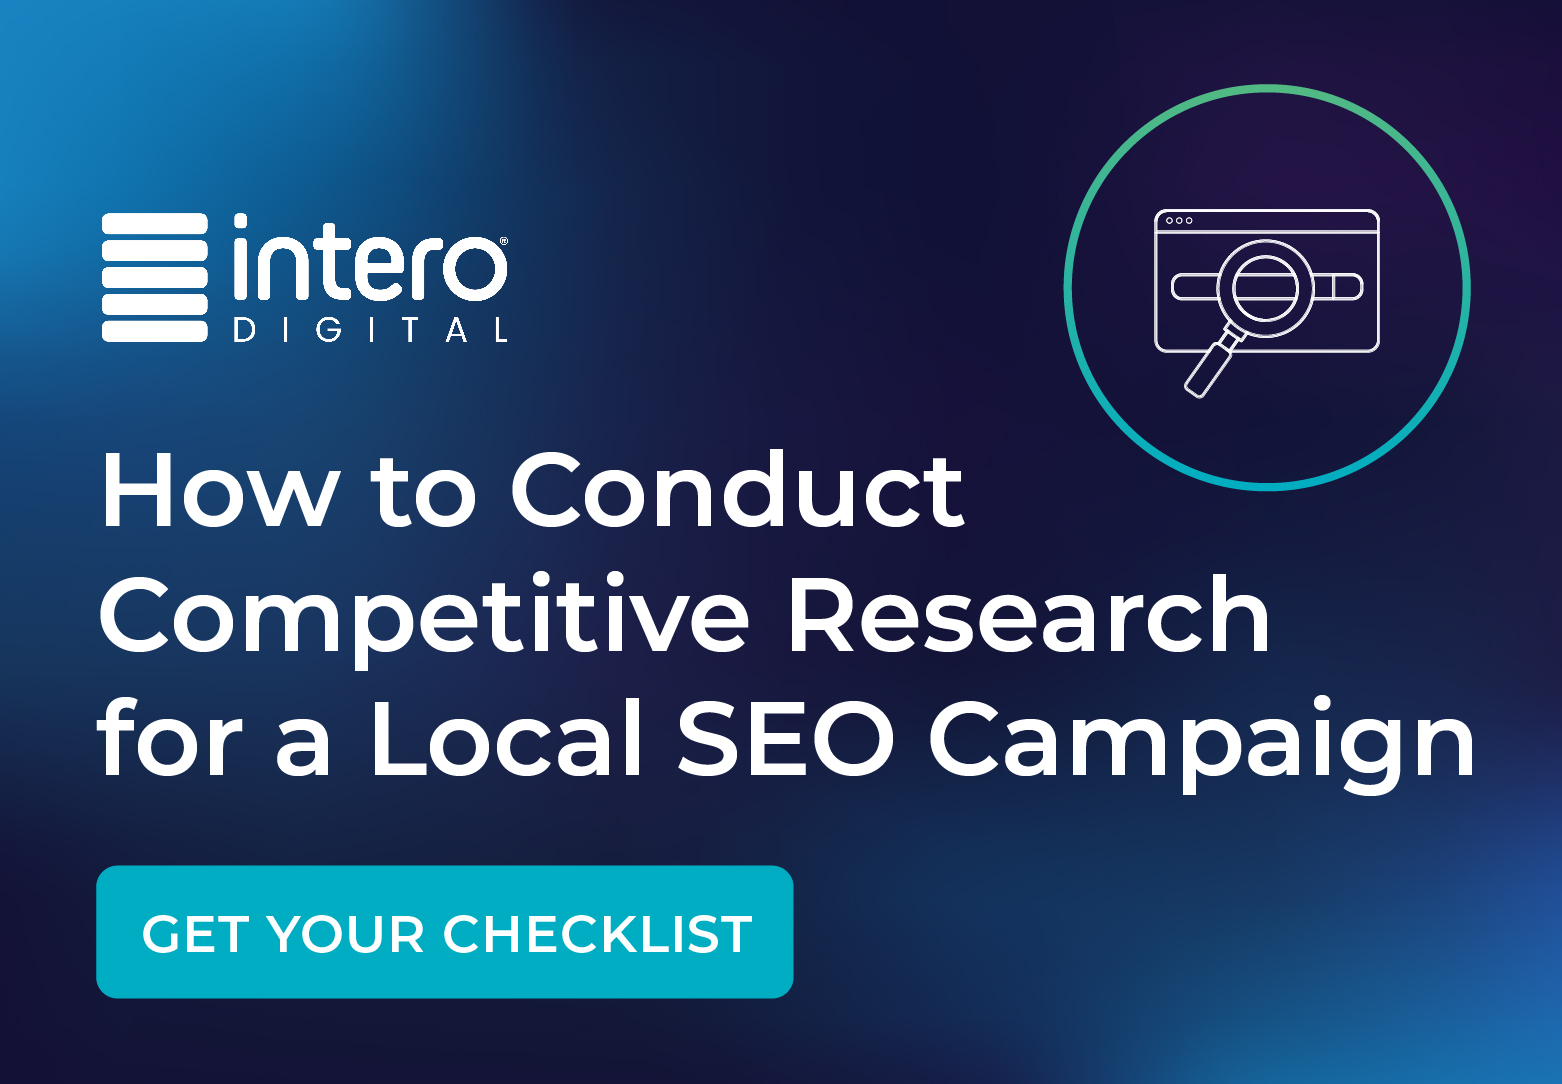 Intero Digital - How to Conduct Competitive Research for a Local SEO Campaign - Get Your Checklist